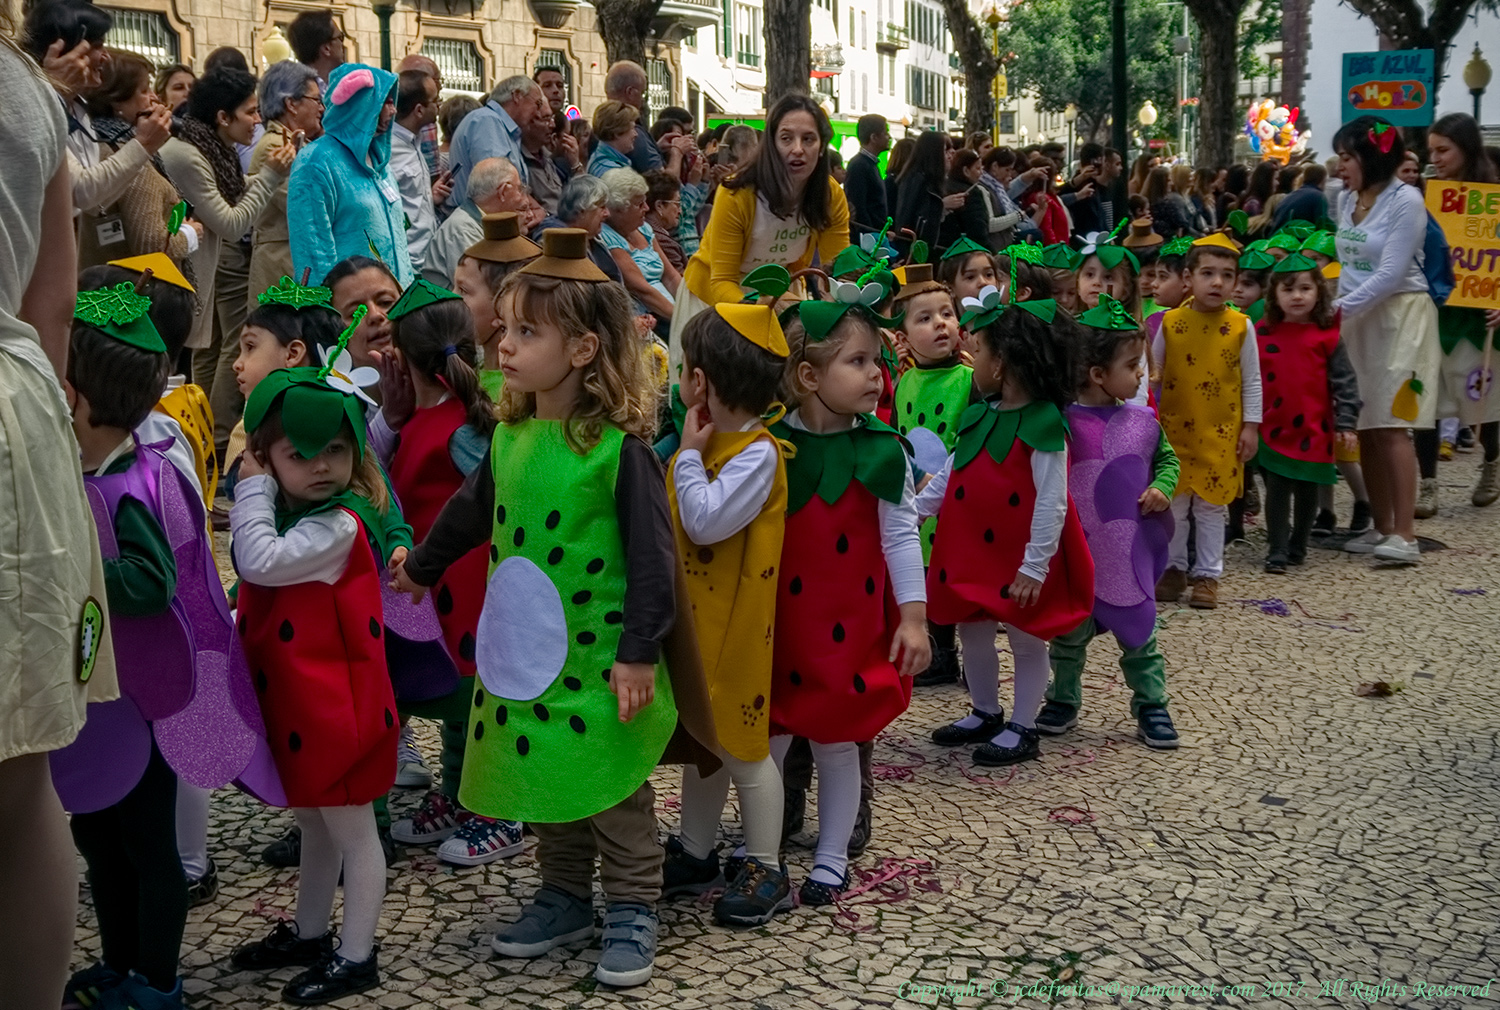 2017 - Childrens Carnival Parade - Funchal, Madeira - Portugal